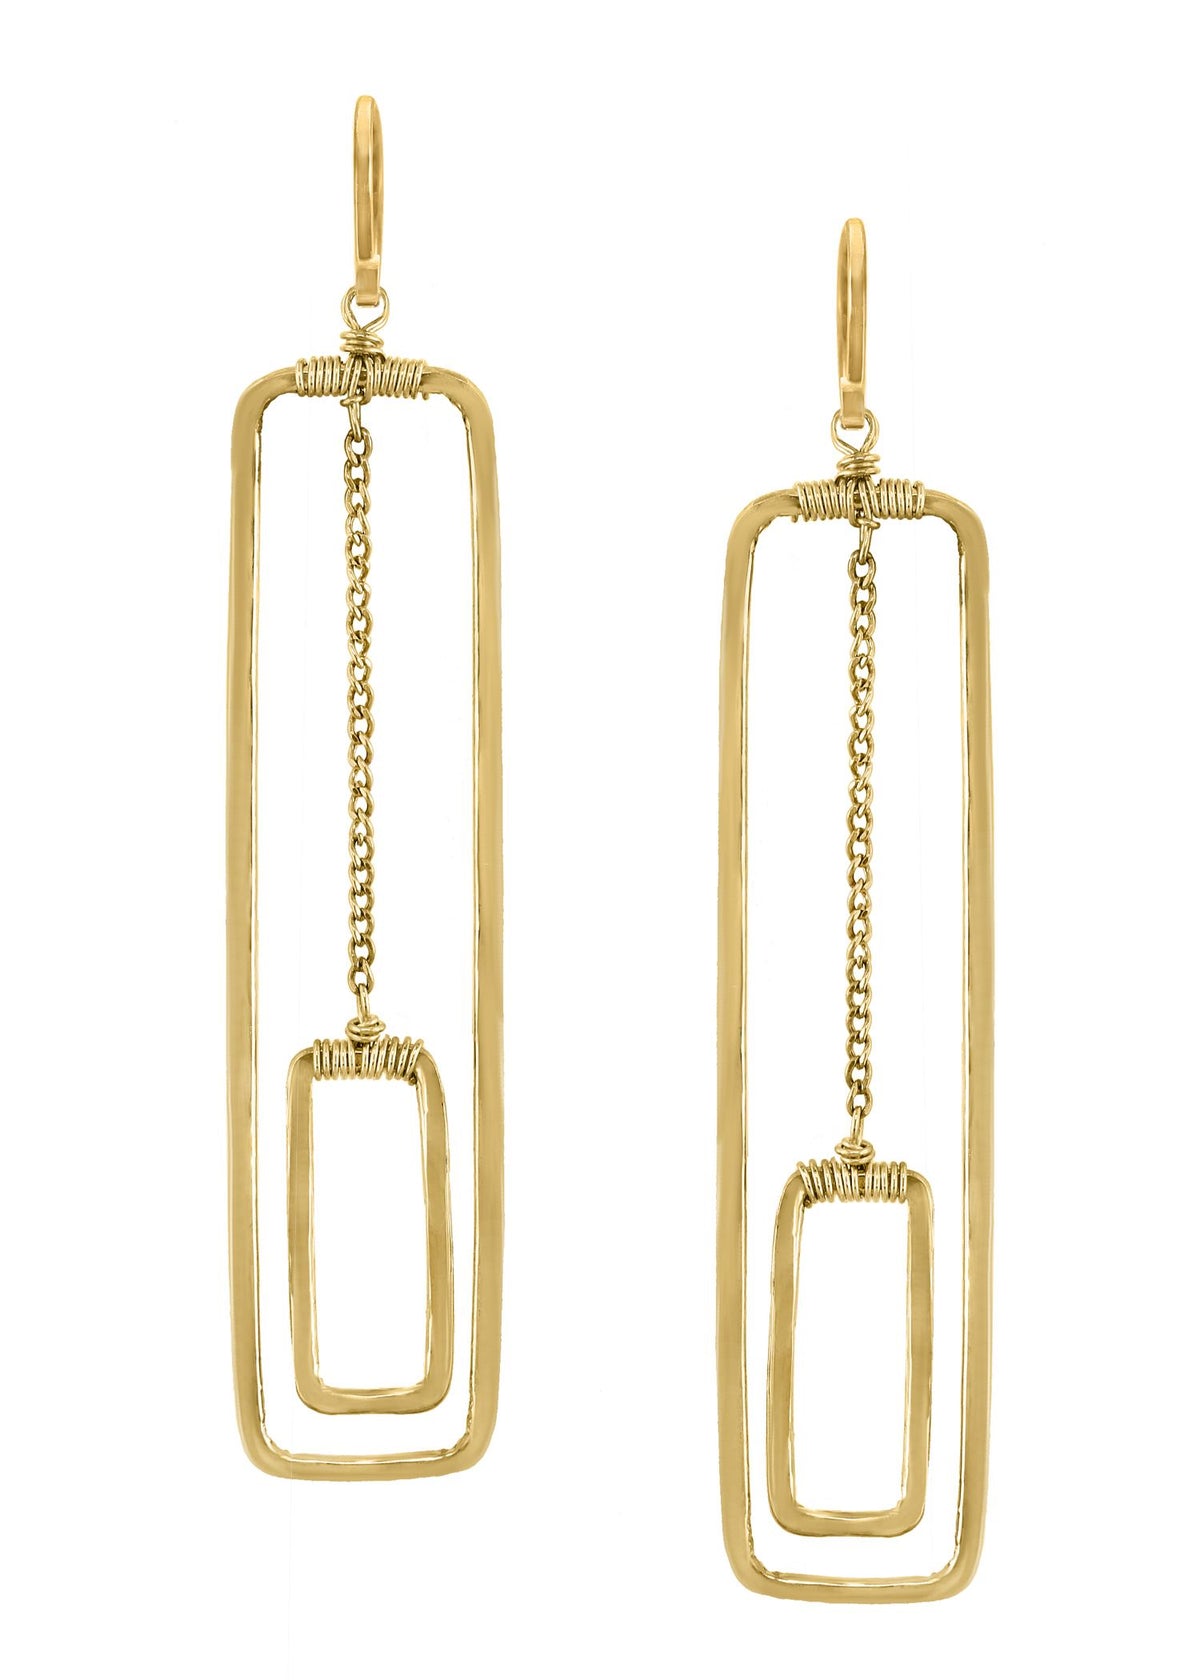 14k gold fill Earrings measure 2-1/4&quot; in length (including the ear wires) and 5/8&quot; in width Handmade in our Los Angeles studio